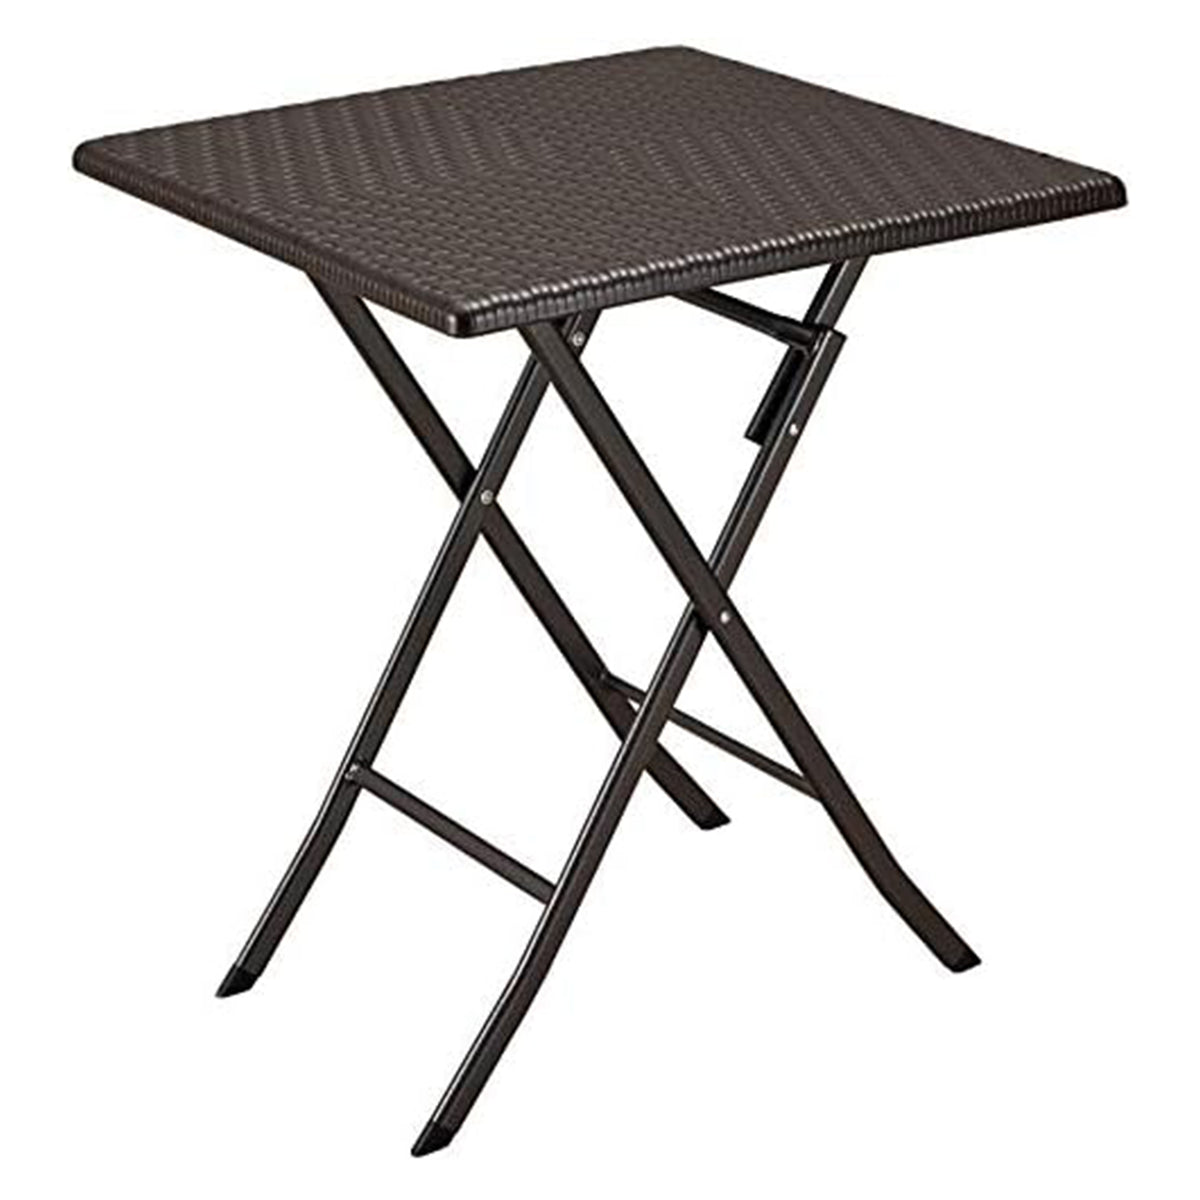 Folding Outdoor Table - Black Color